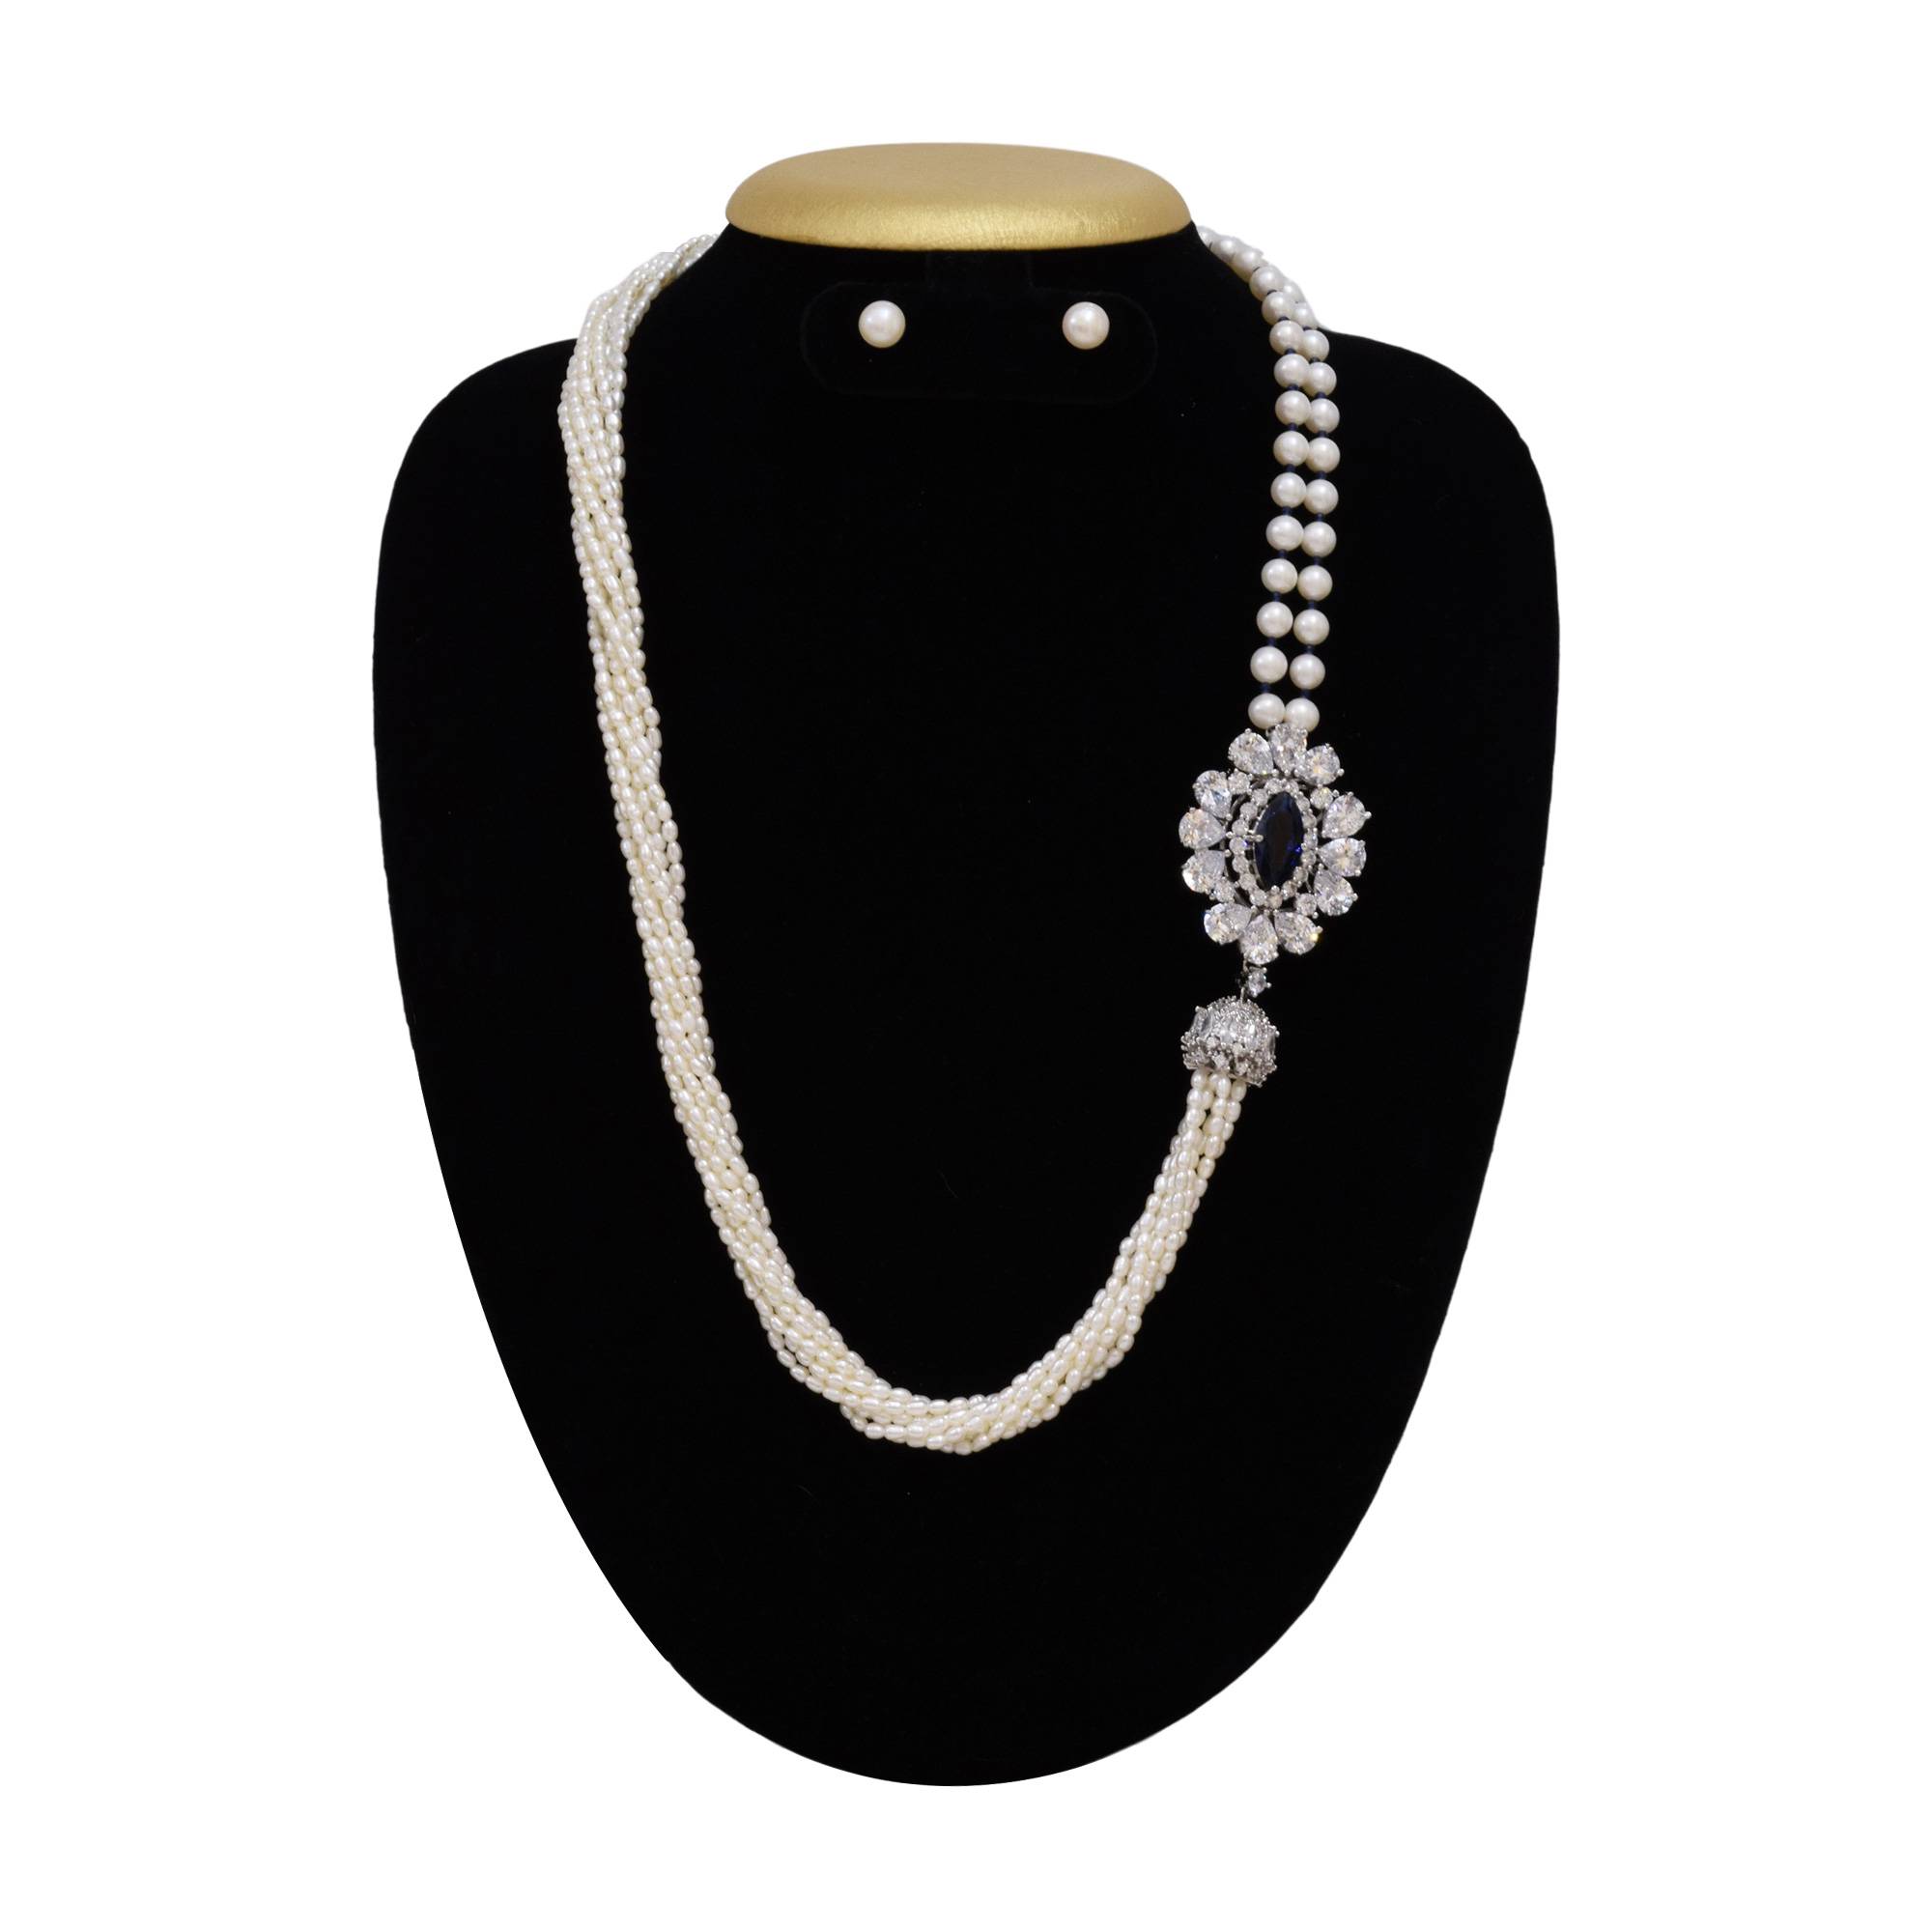 Traditional and beautiful pearl necklace set with round pendant